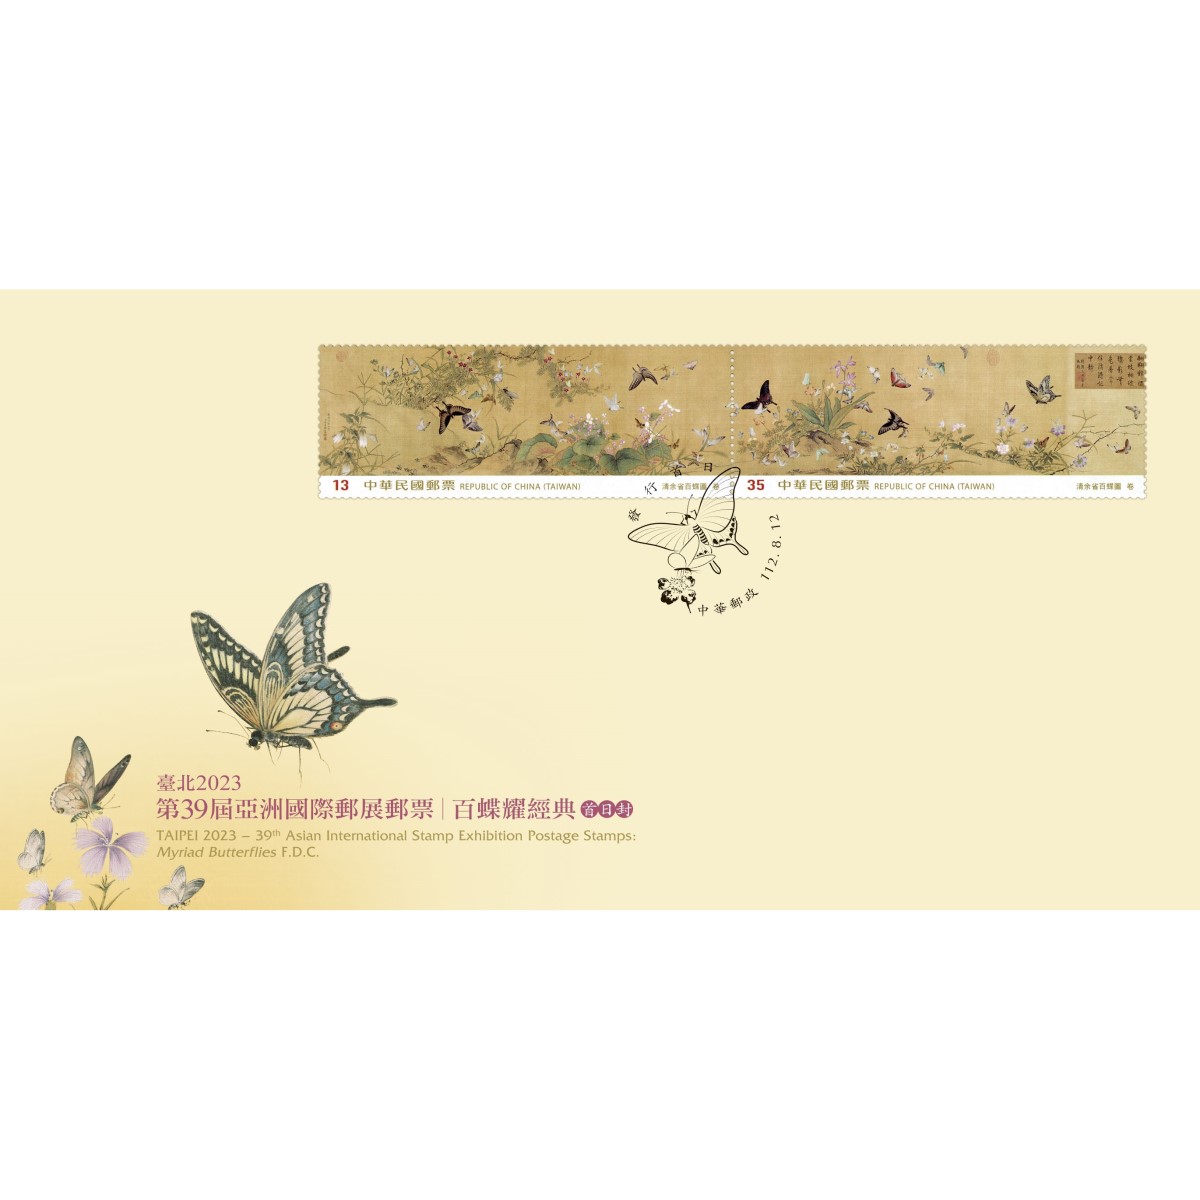 TAIPEI 2023 – 39th Asian International Stamp Exhibition Postage Stamps: Myriad Butterflies Pre-cancelled FDC affixed with a complete set of stamps